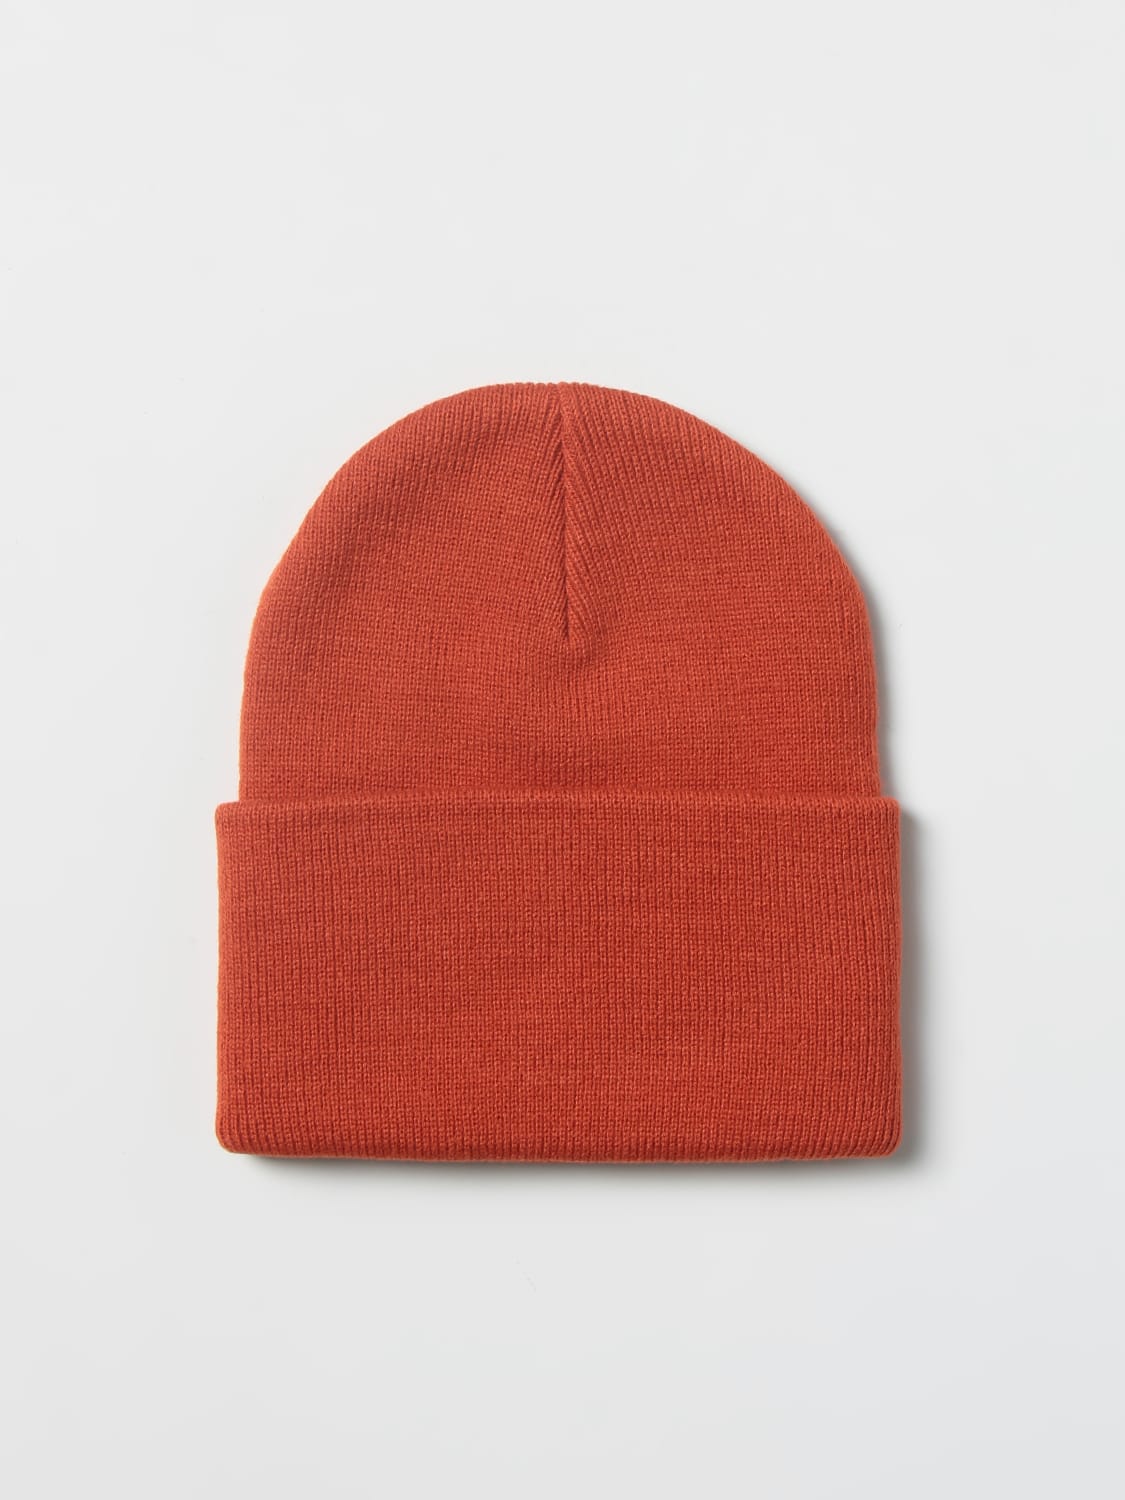 Carhartt Wip Outlet: Cappello Carhartt in maglia a costine